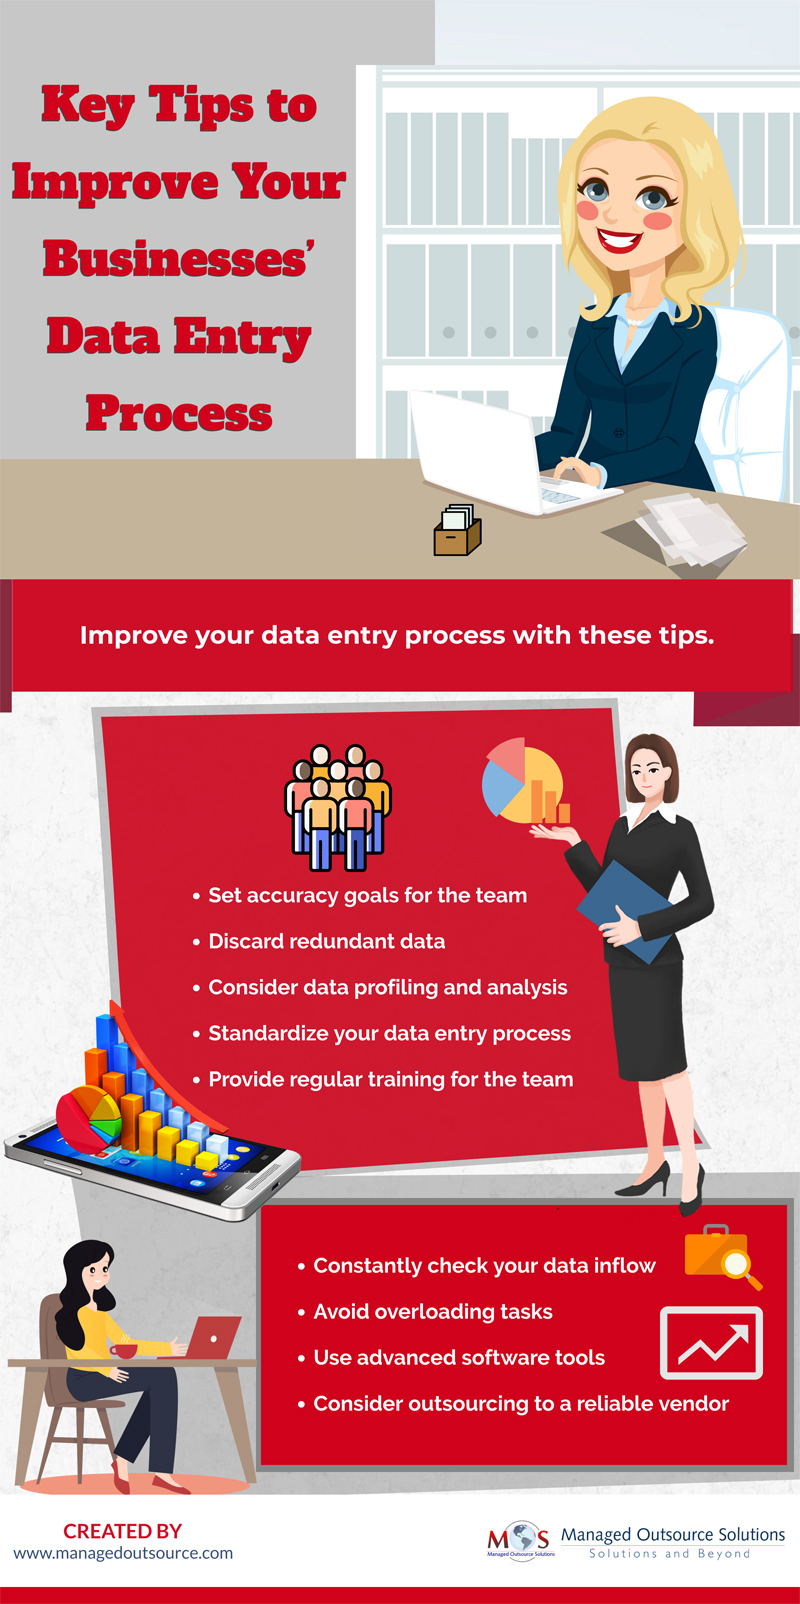 Tips to Improve Your Businesses’ Data Entry Process